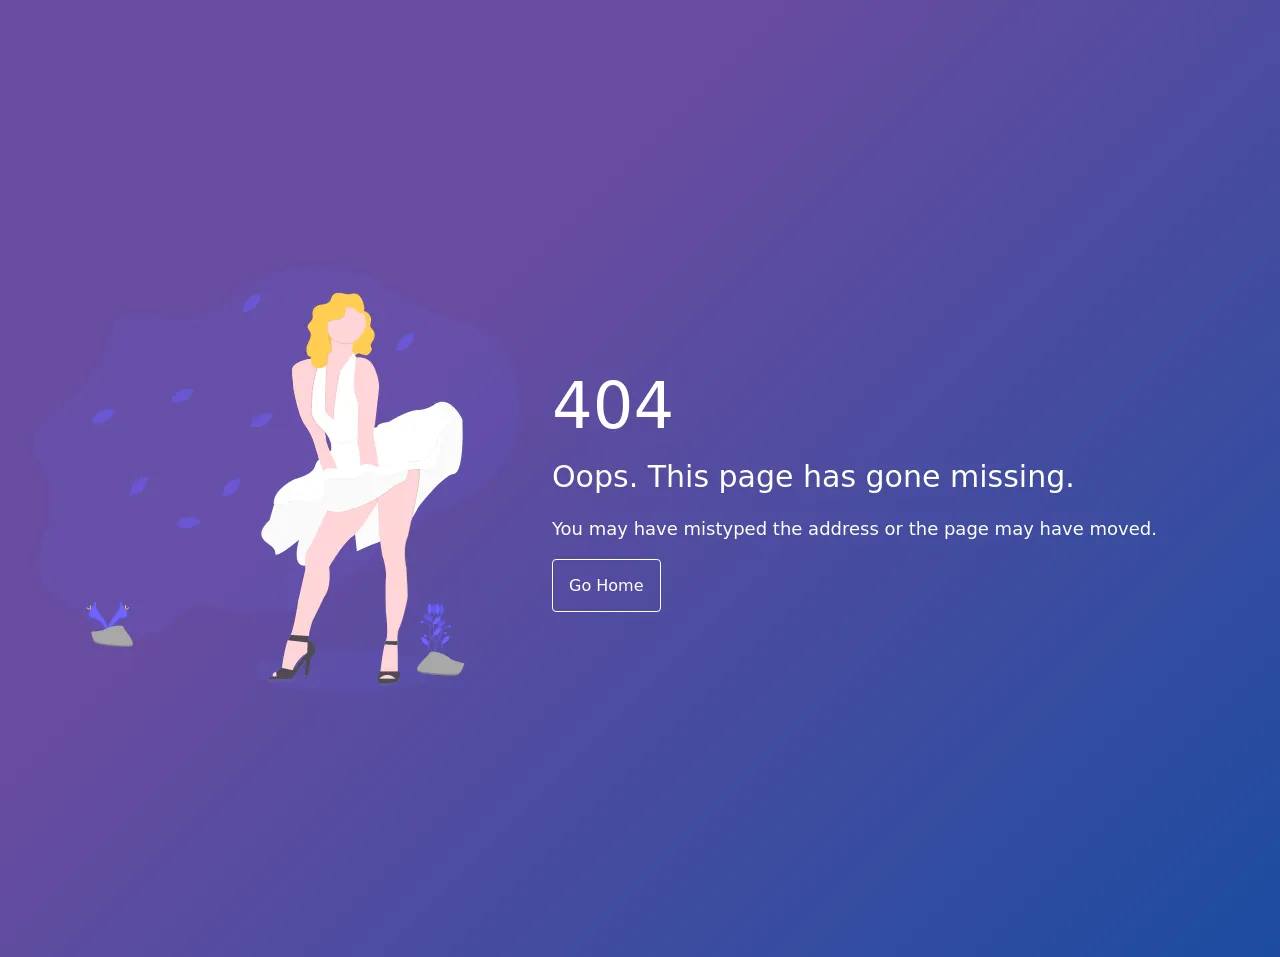 Not Found Page